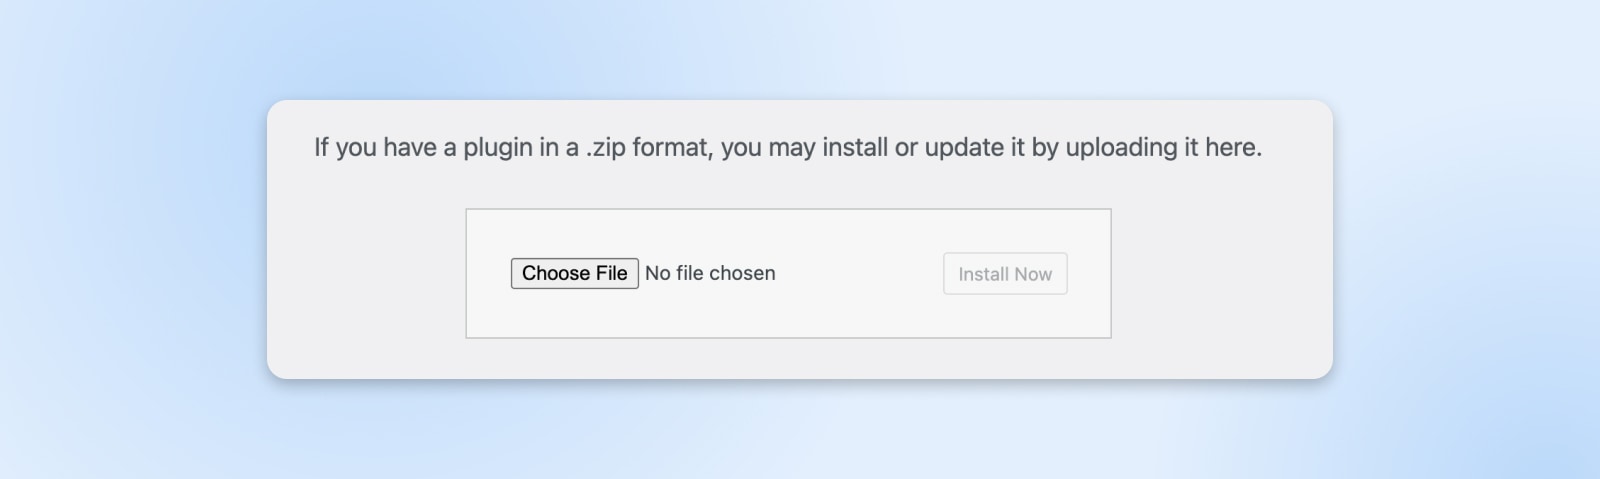 screenshot showing "if you have a plugin in a .zip format, you may install or update it by uploading it here" with a choose file to upload button